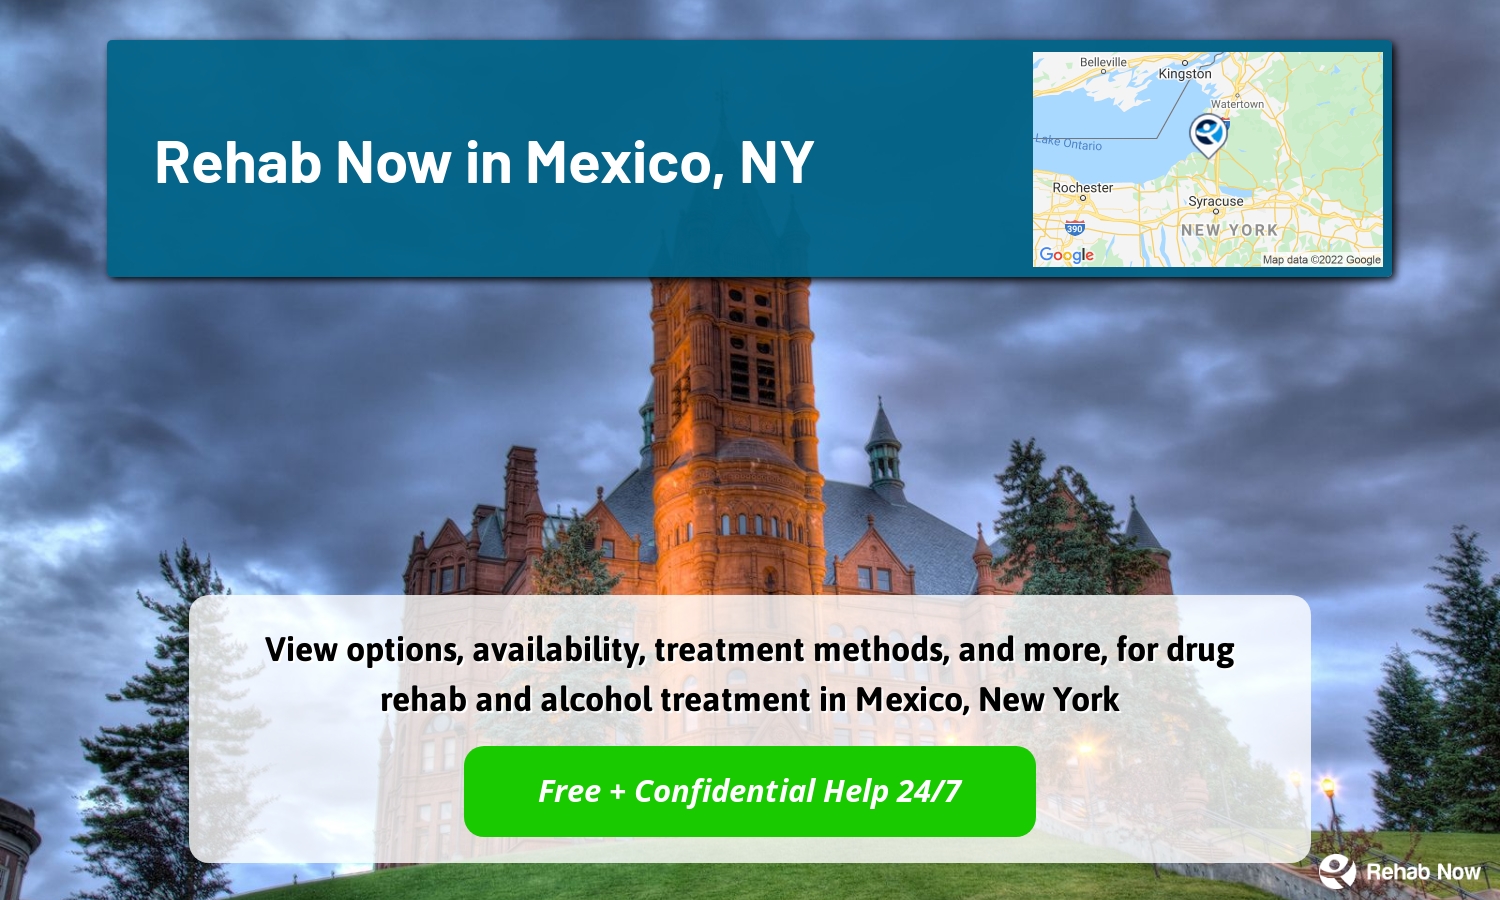 View options, availability, treatment methods, and more, for drug rehab and alcohol treatment in Mexico, New York